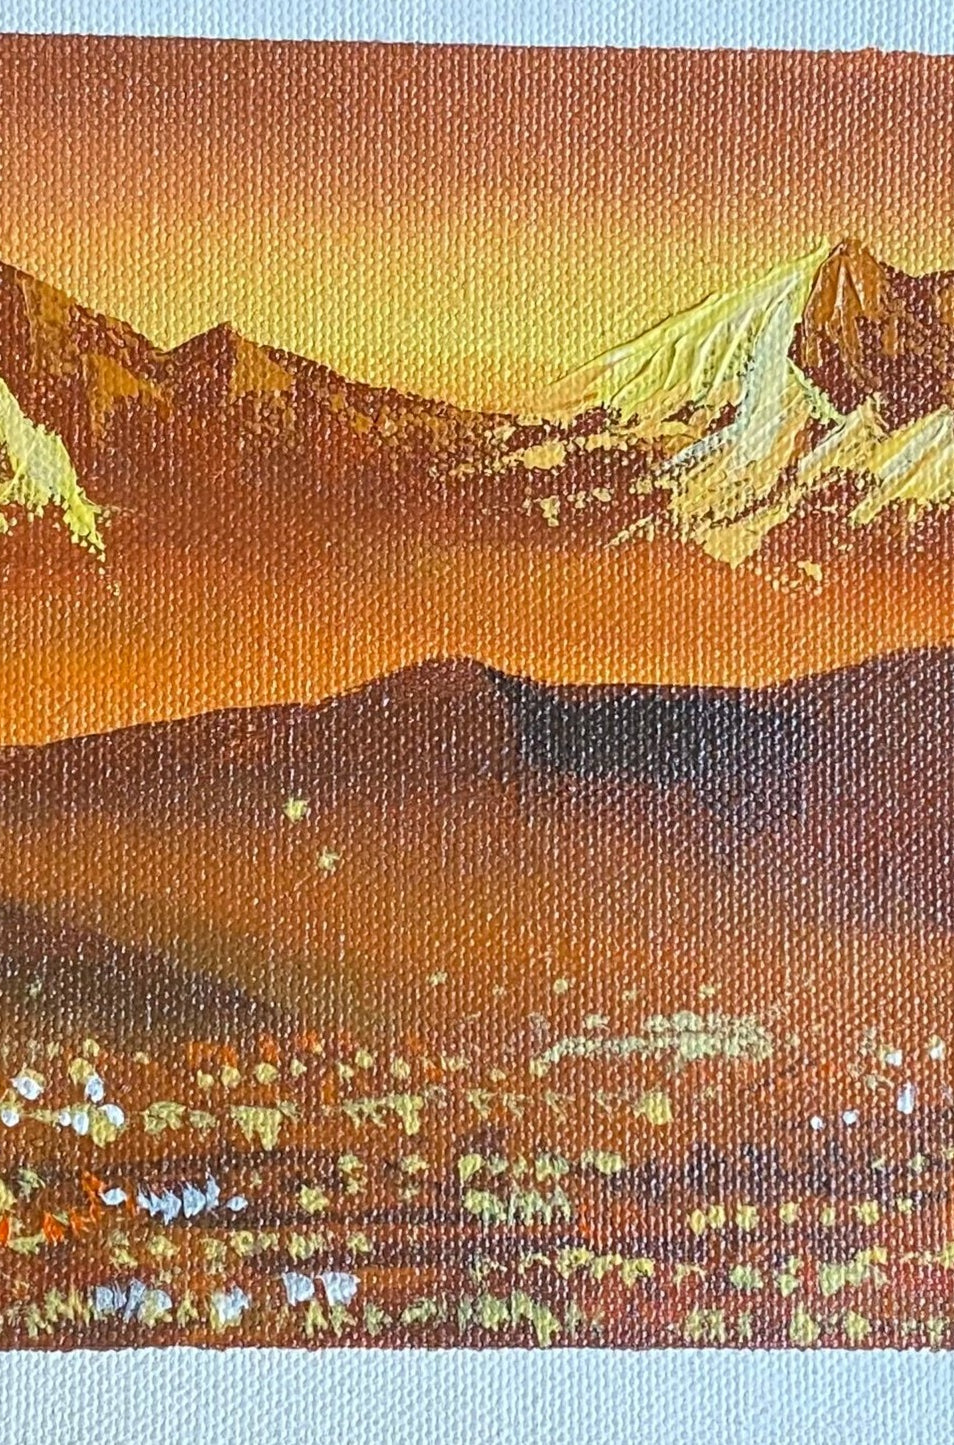 Oil Painting of Kathmandu Valley Art with Sunrise view of Himalayas.